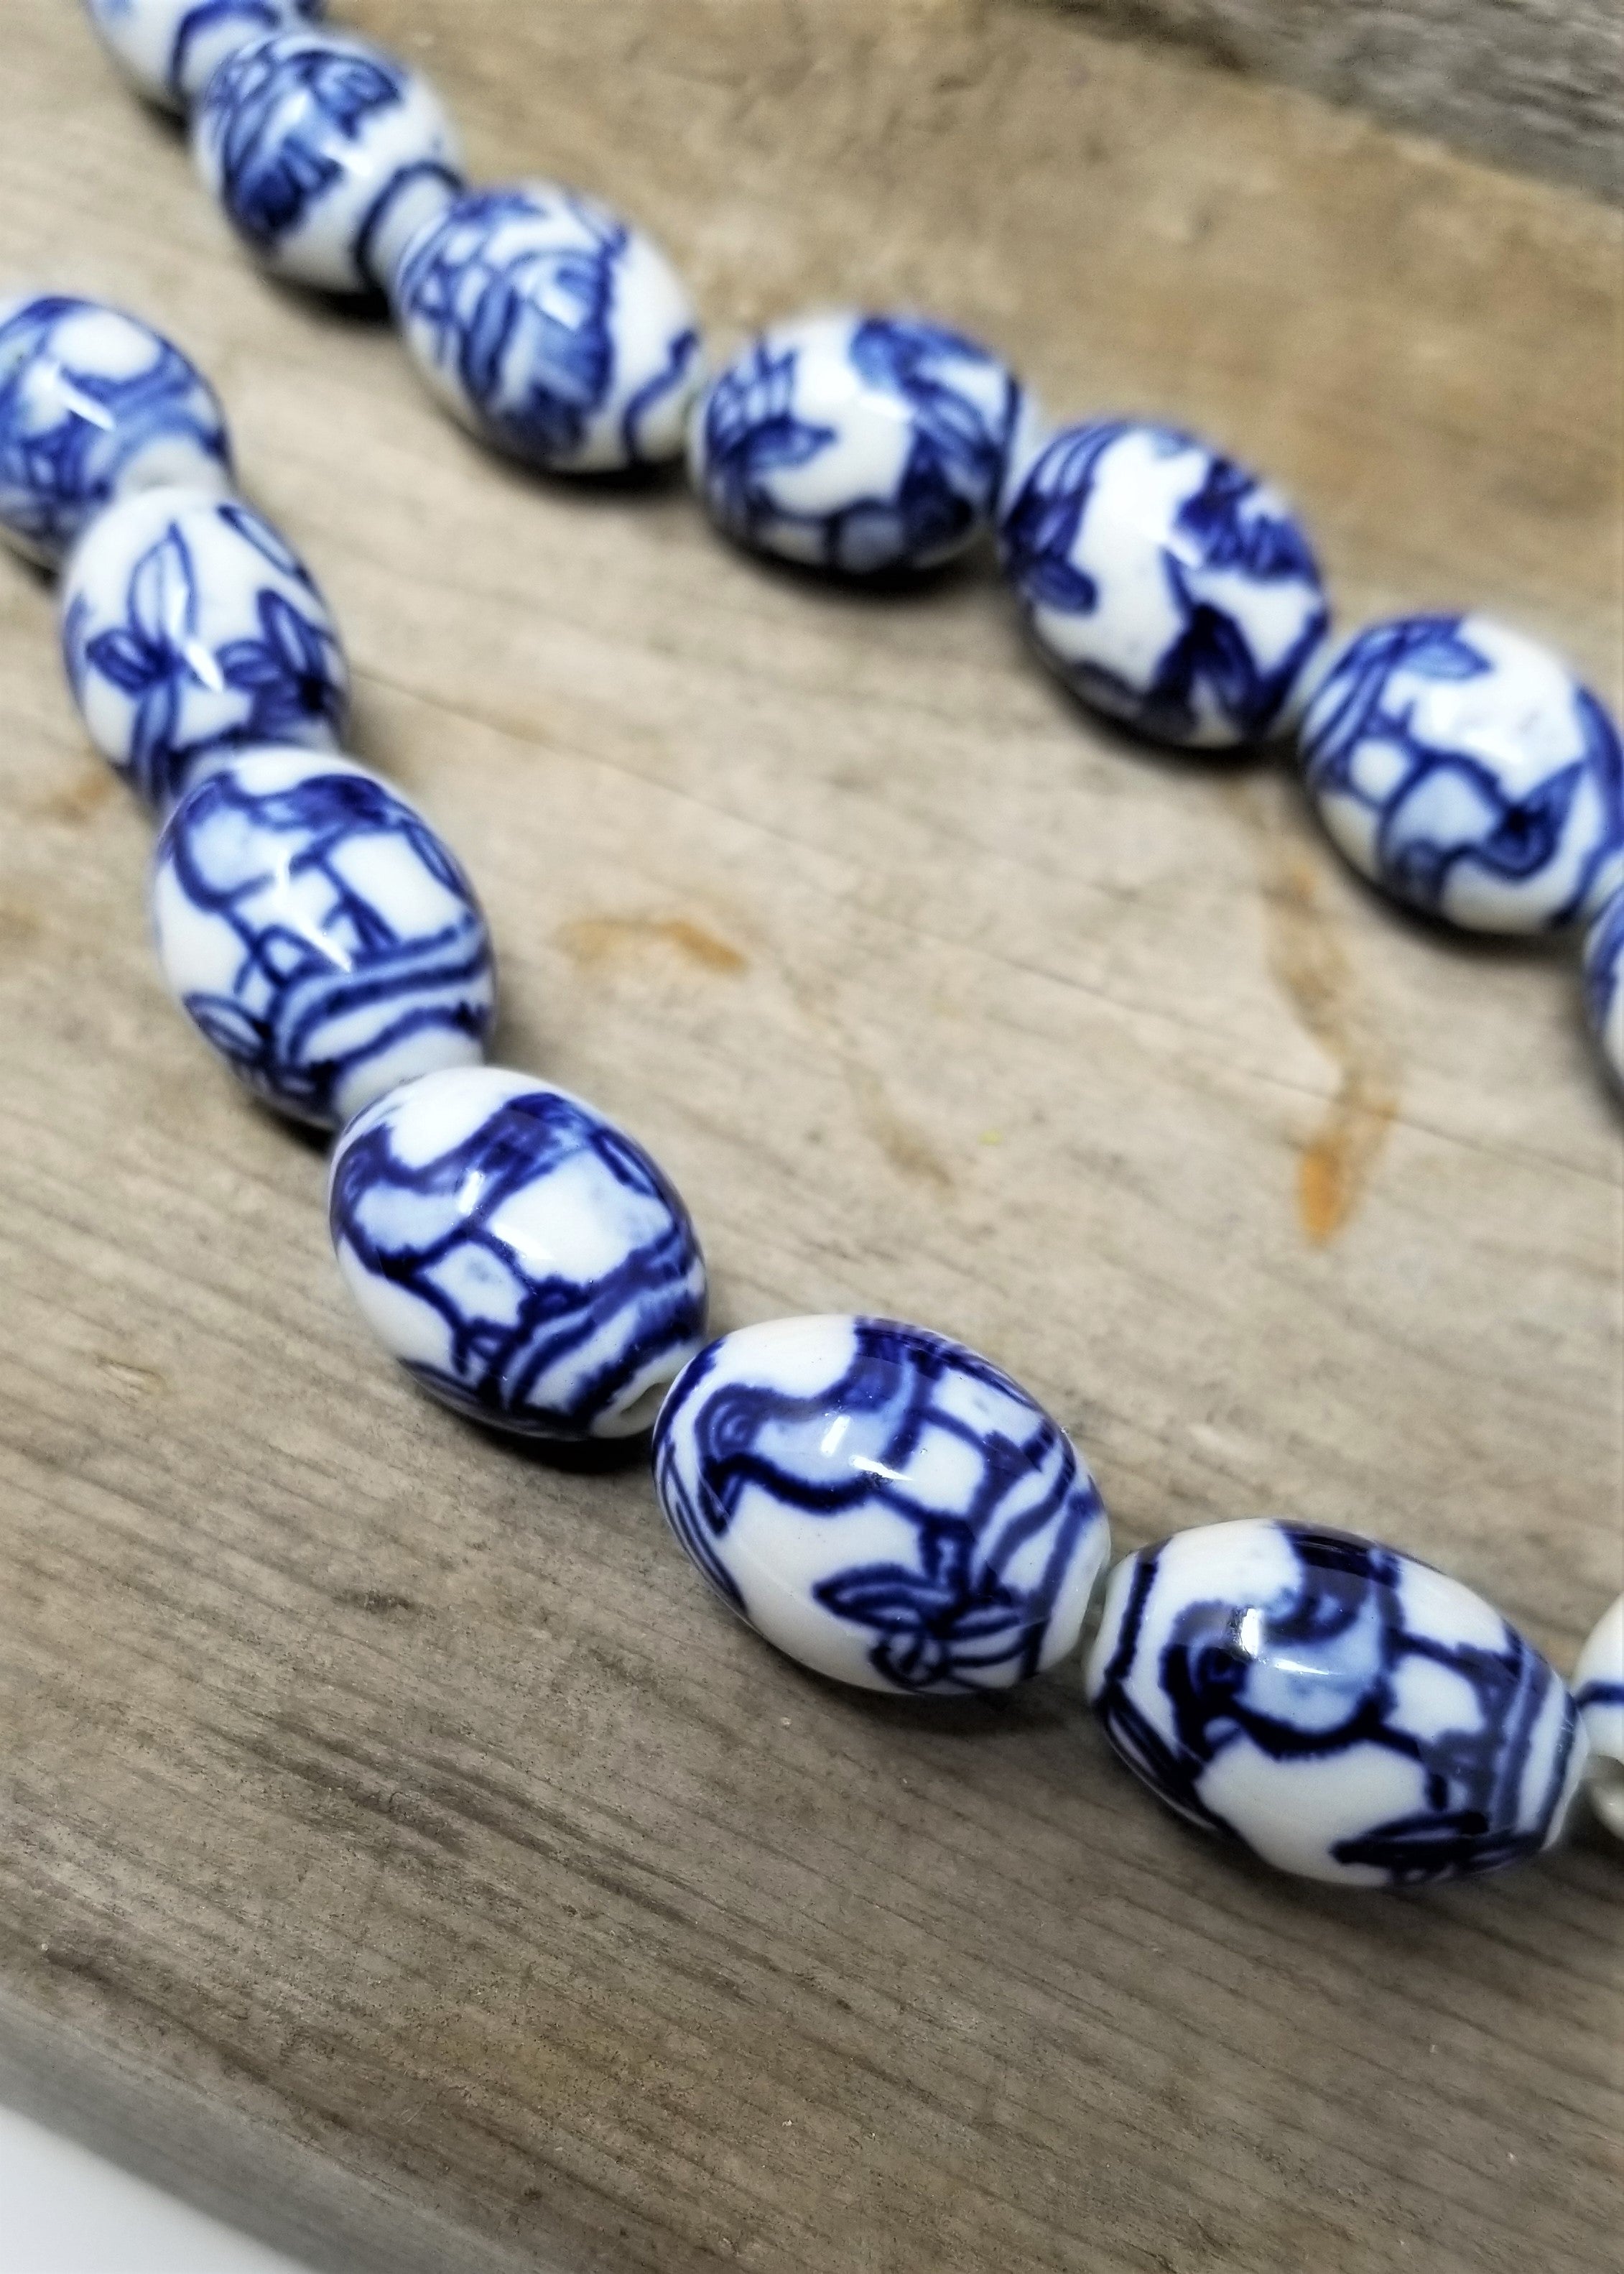 Stunning Blue and White Porcelain Beads Oval with Birds